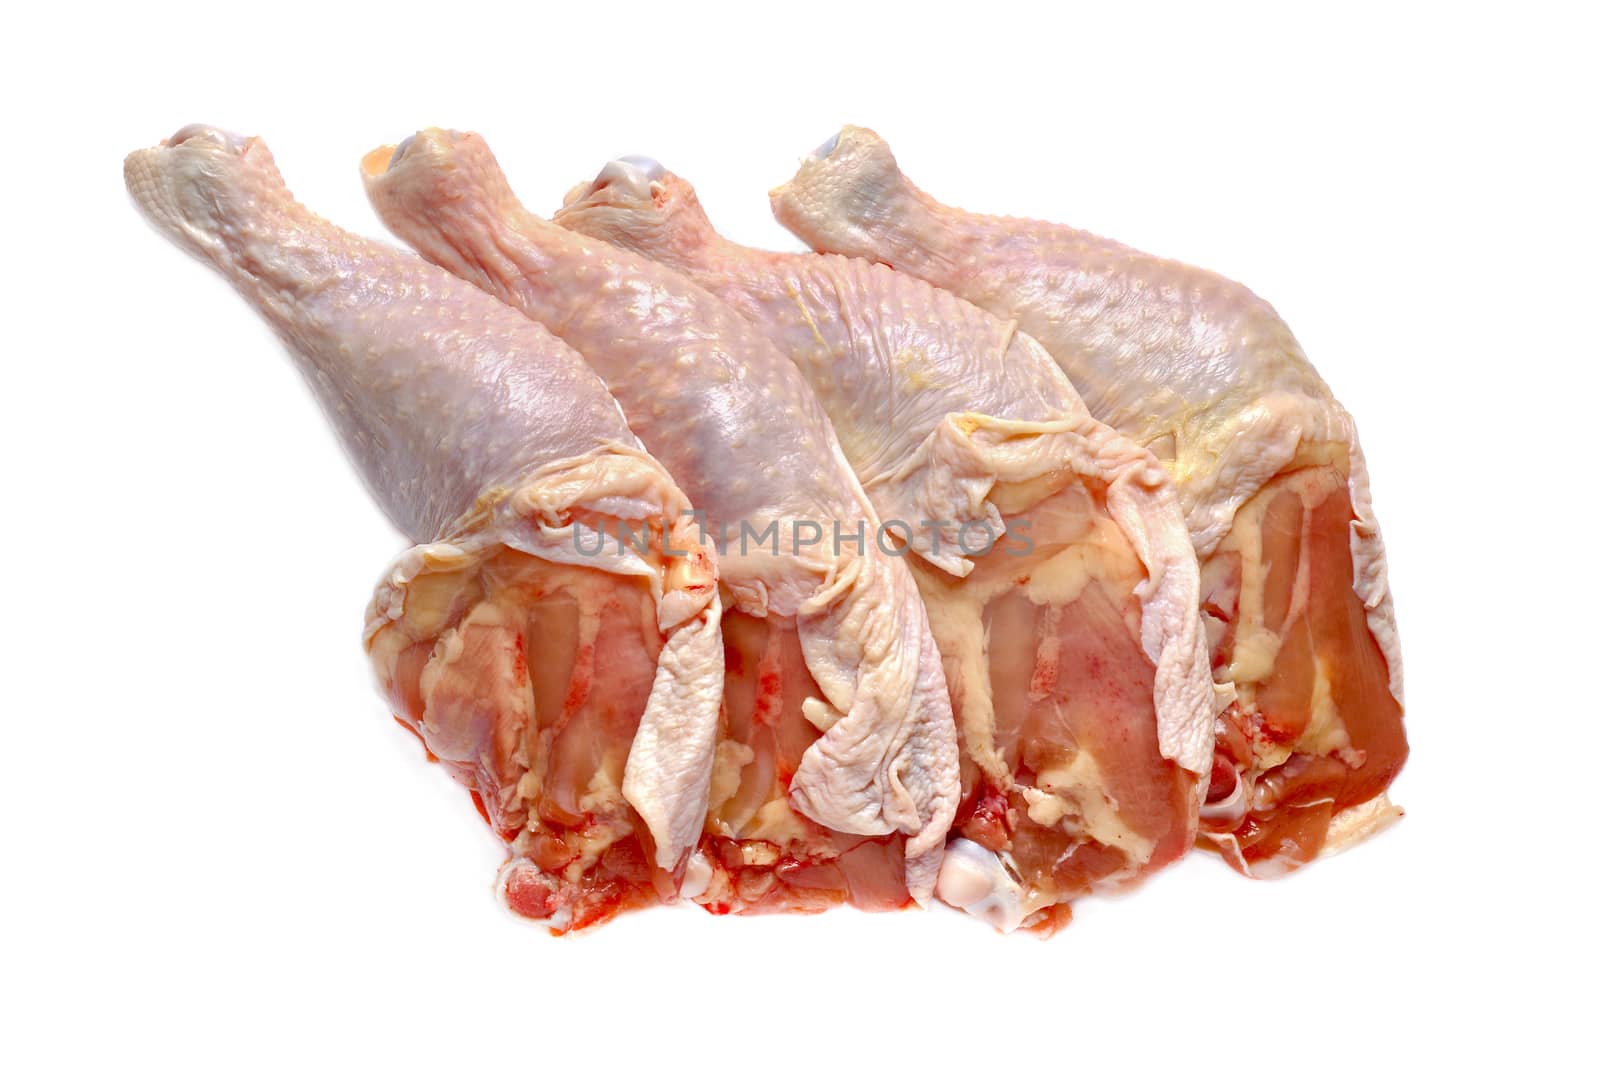 Raw chicken's legs isolated against white background 